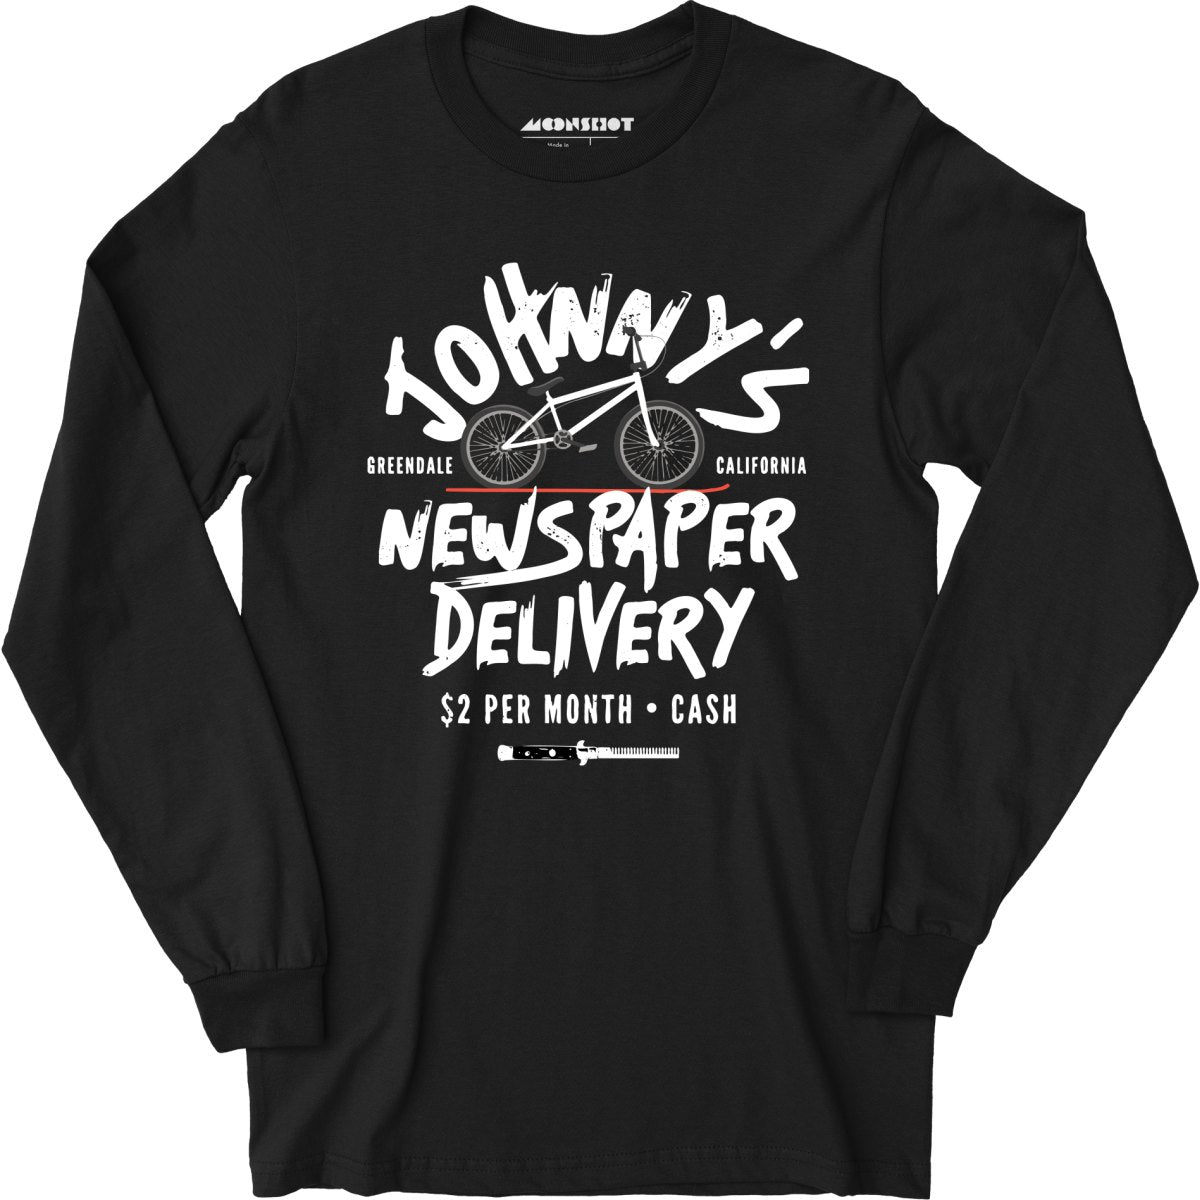 Johnny's Newspaper Delivery - Long Sleeve T-Shirt